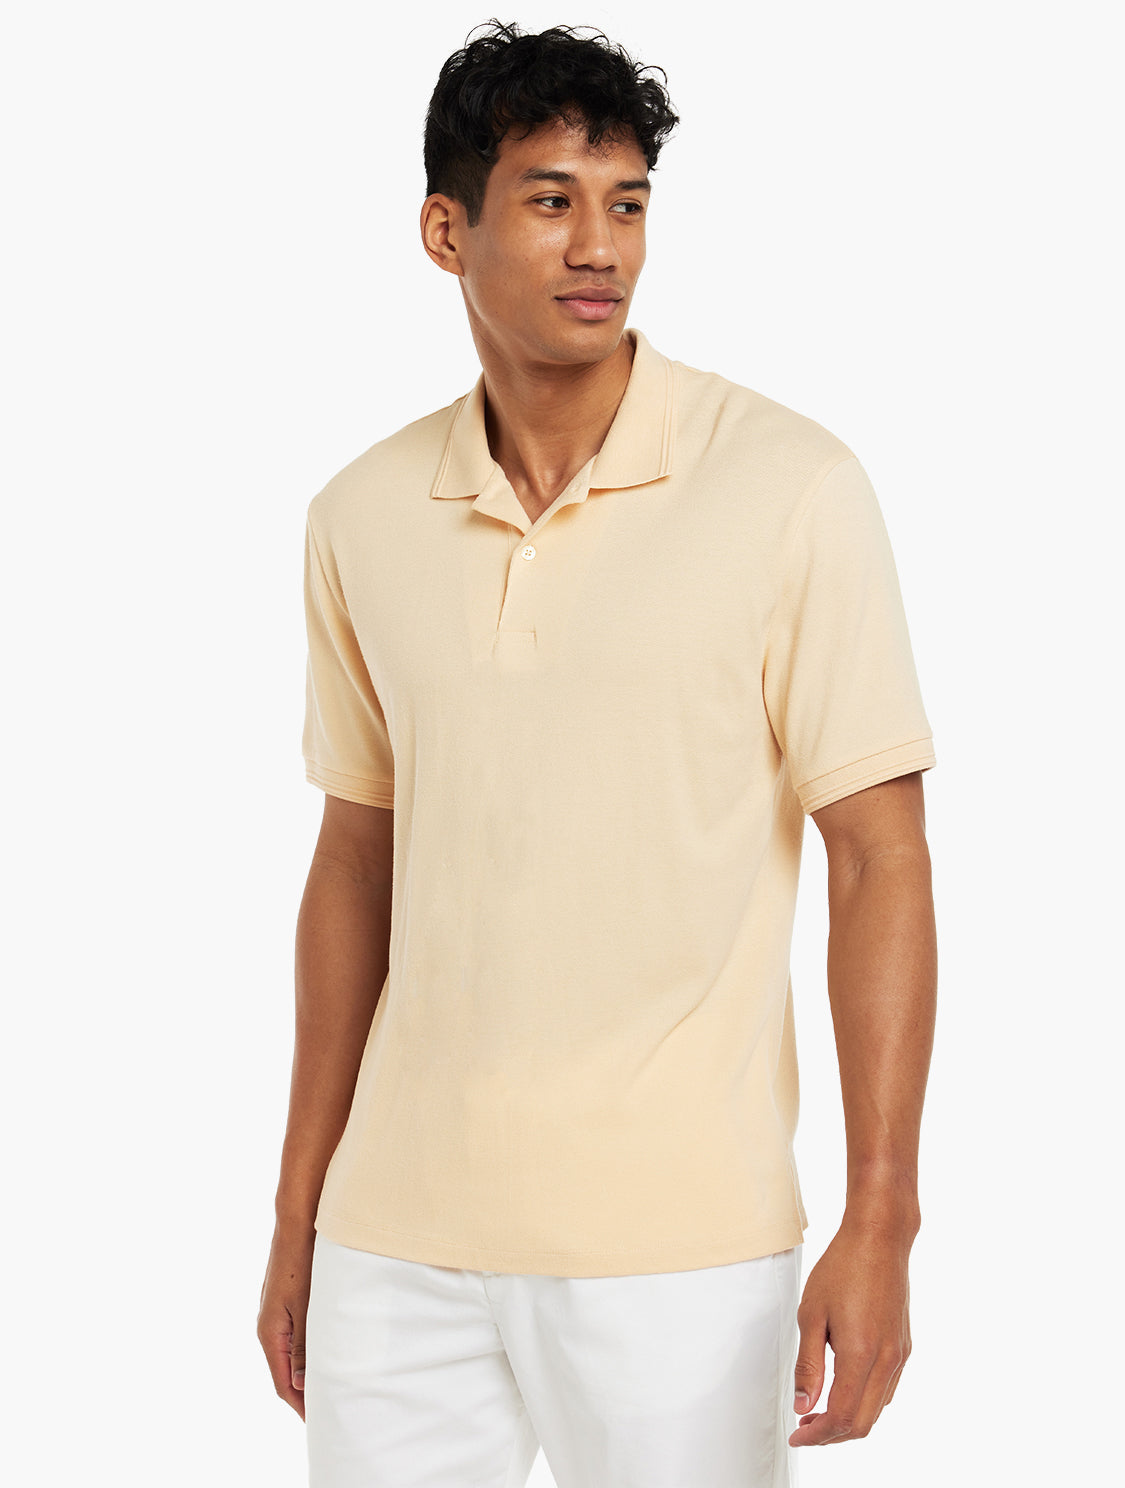 CLASSIC S-S PIQUE POLO - Ready to Wear